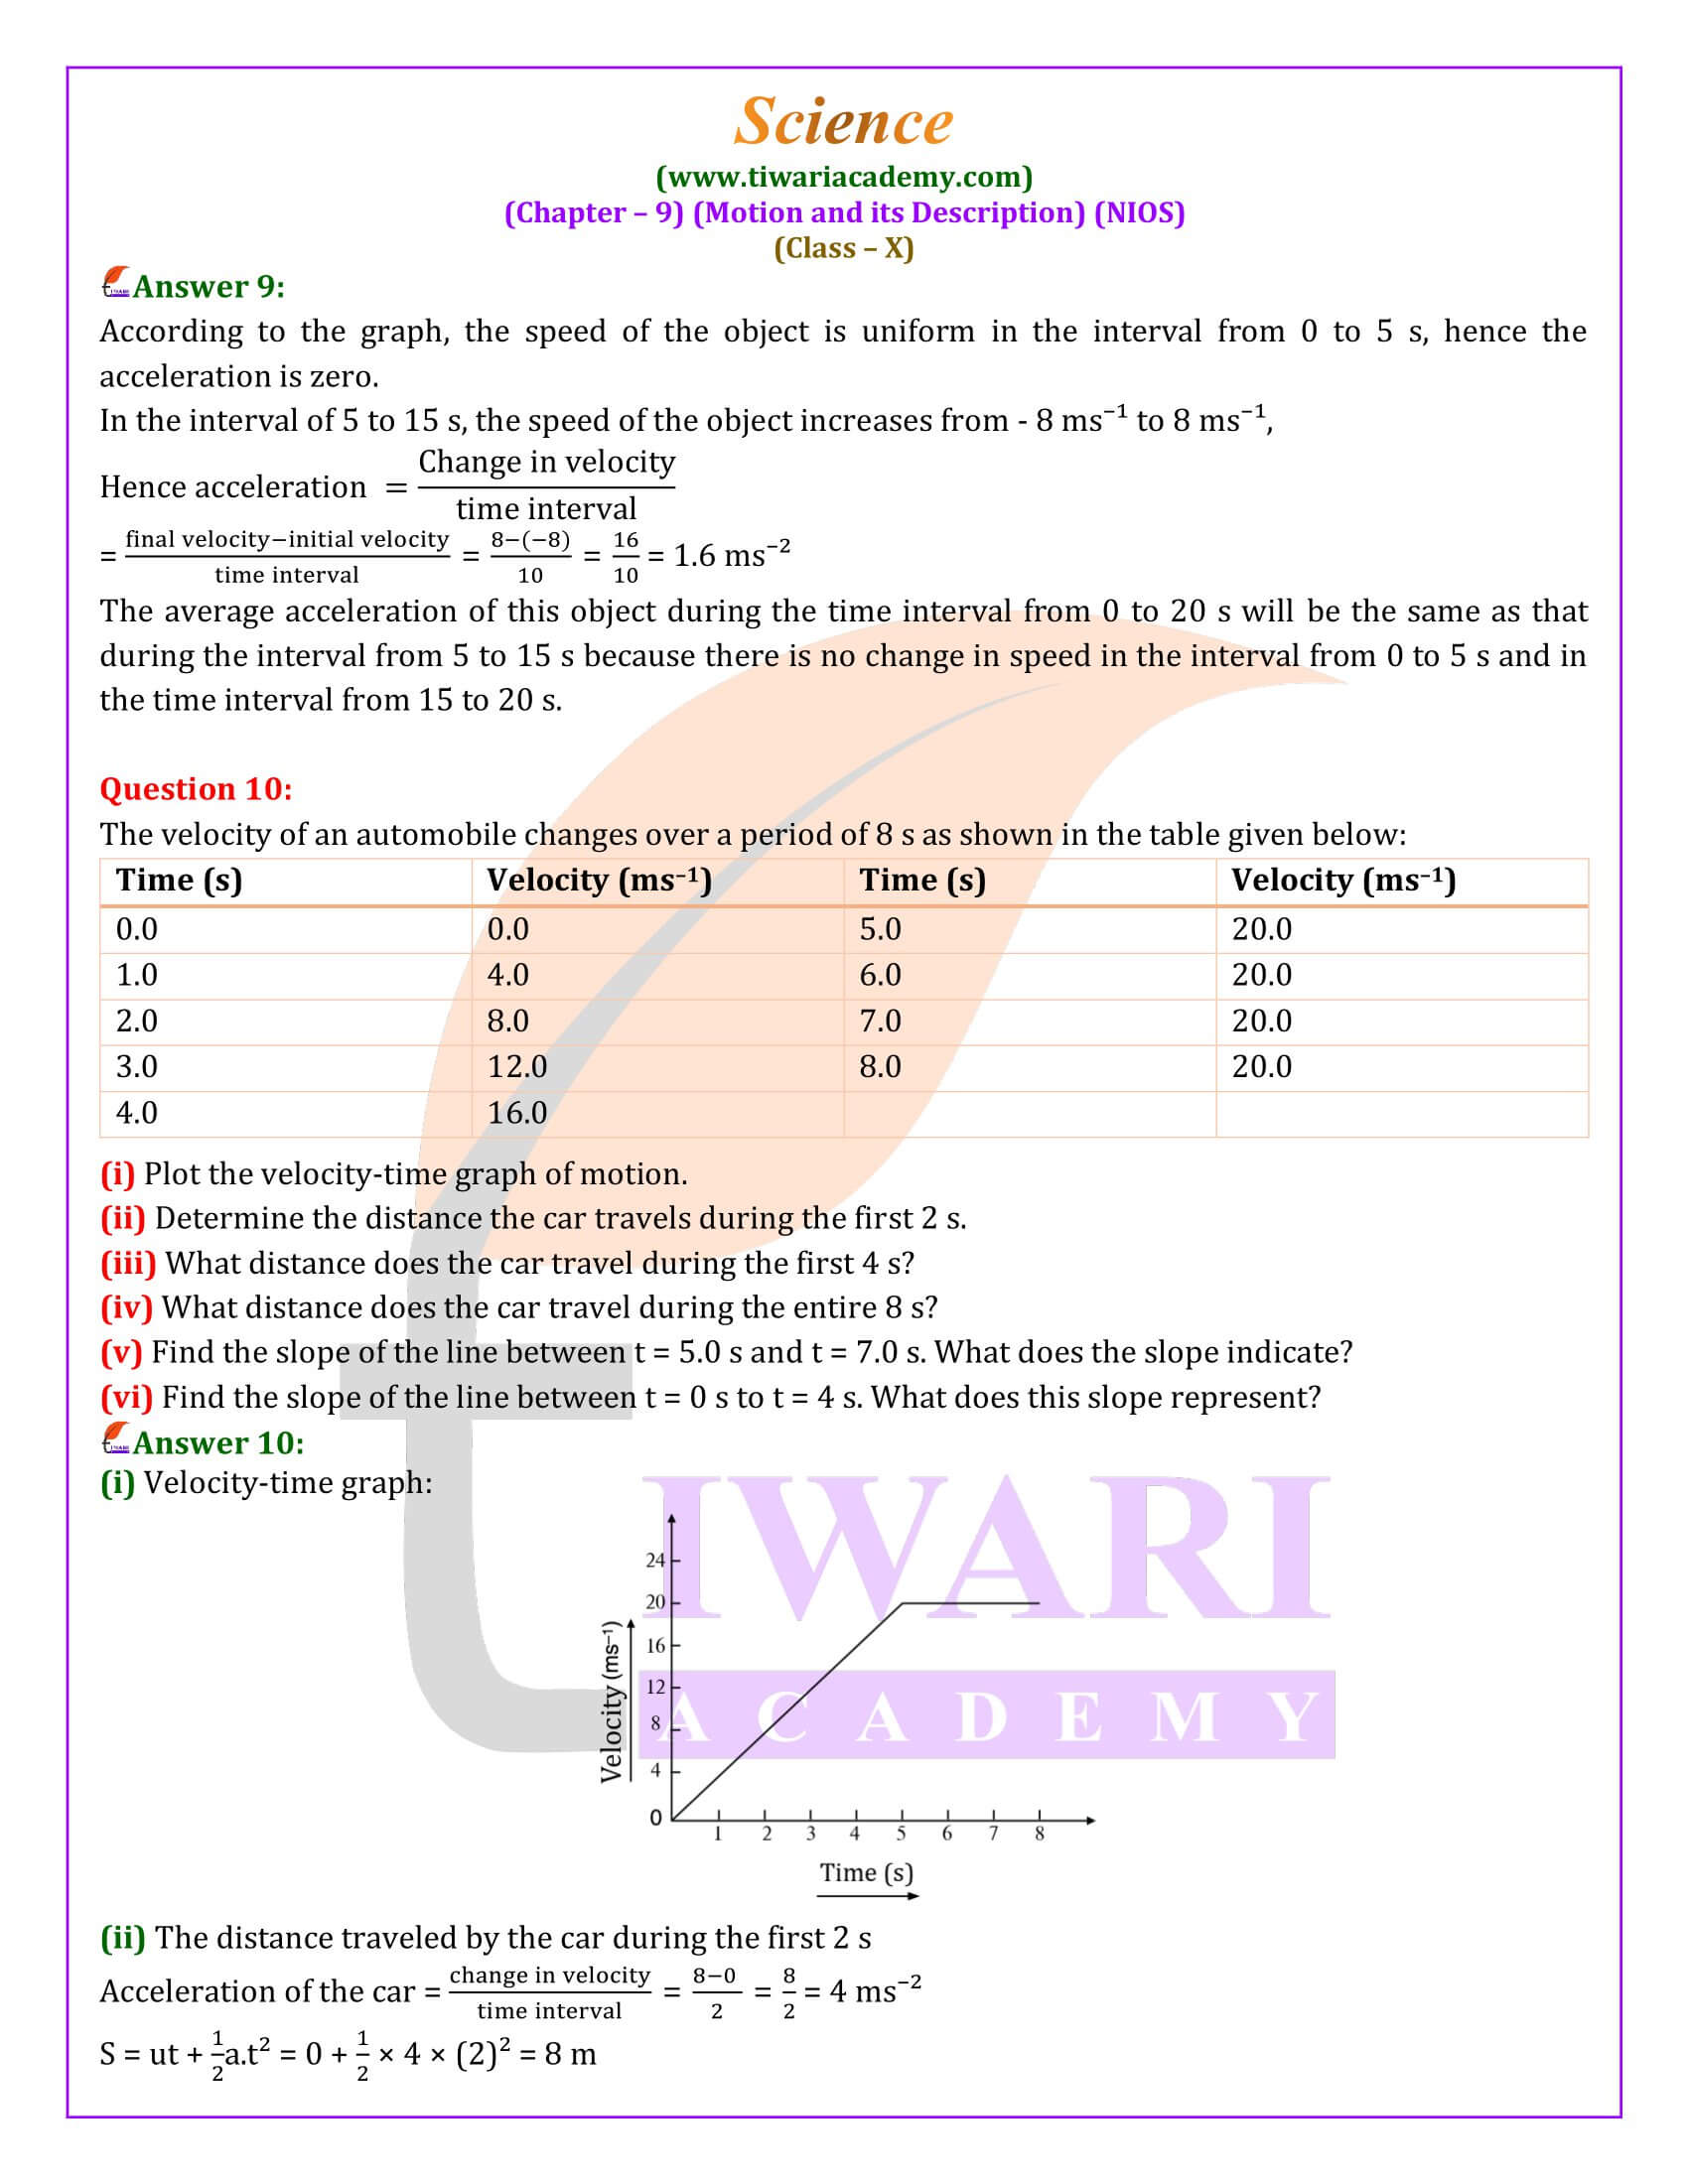 NIOS Class 10 Science Chapter 9 All Answers